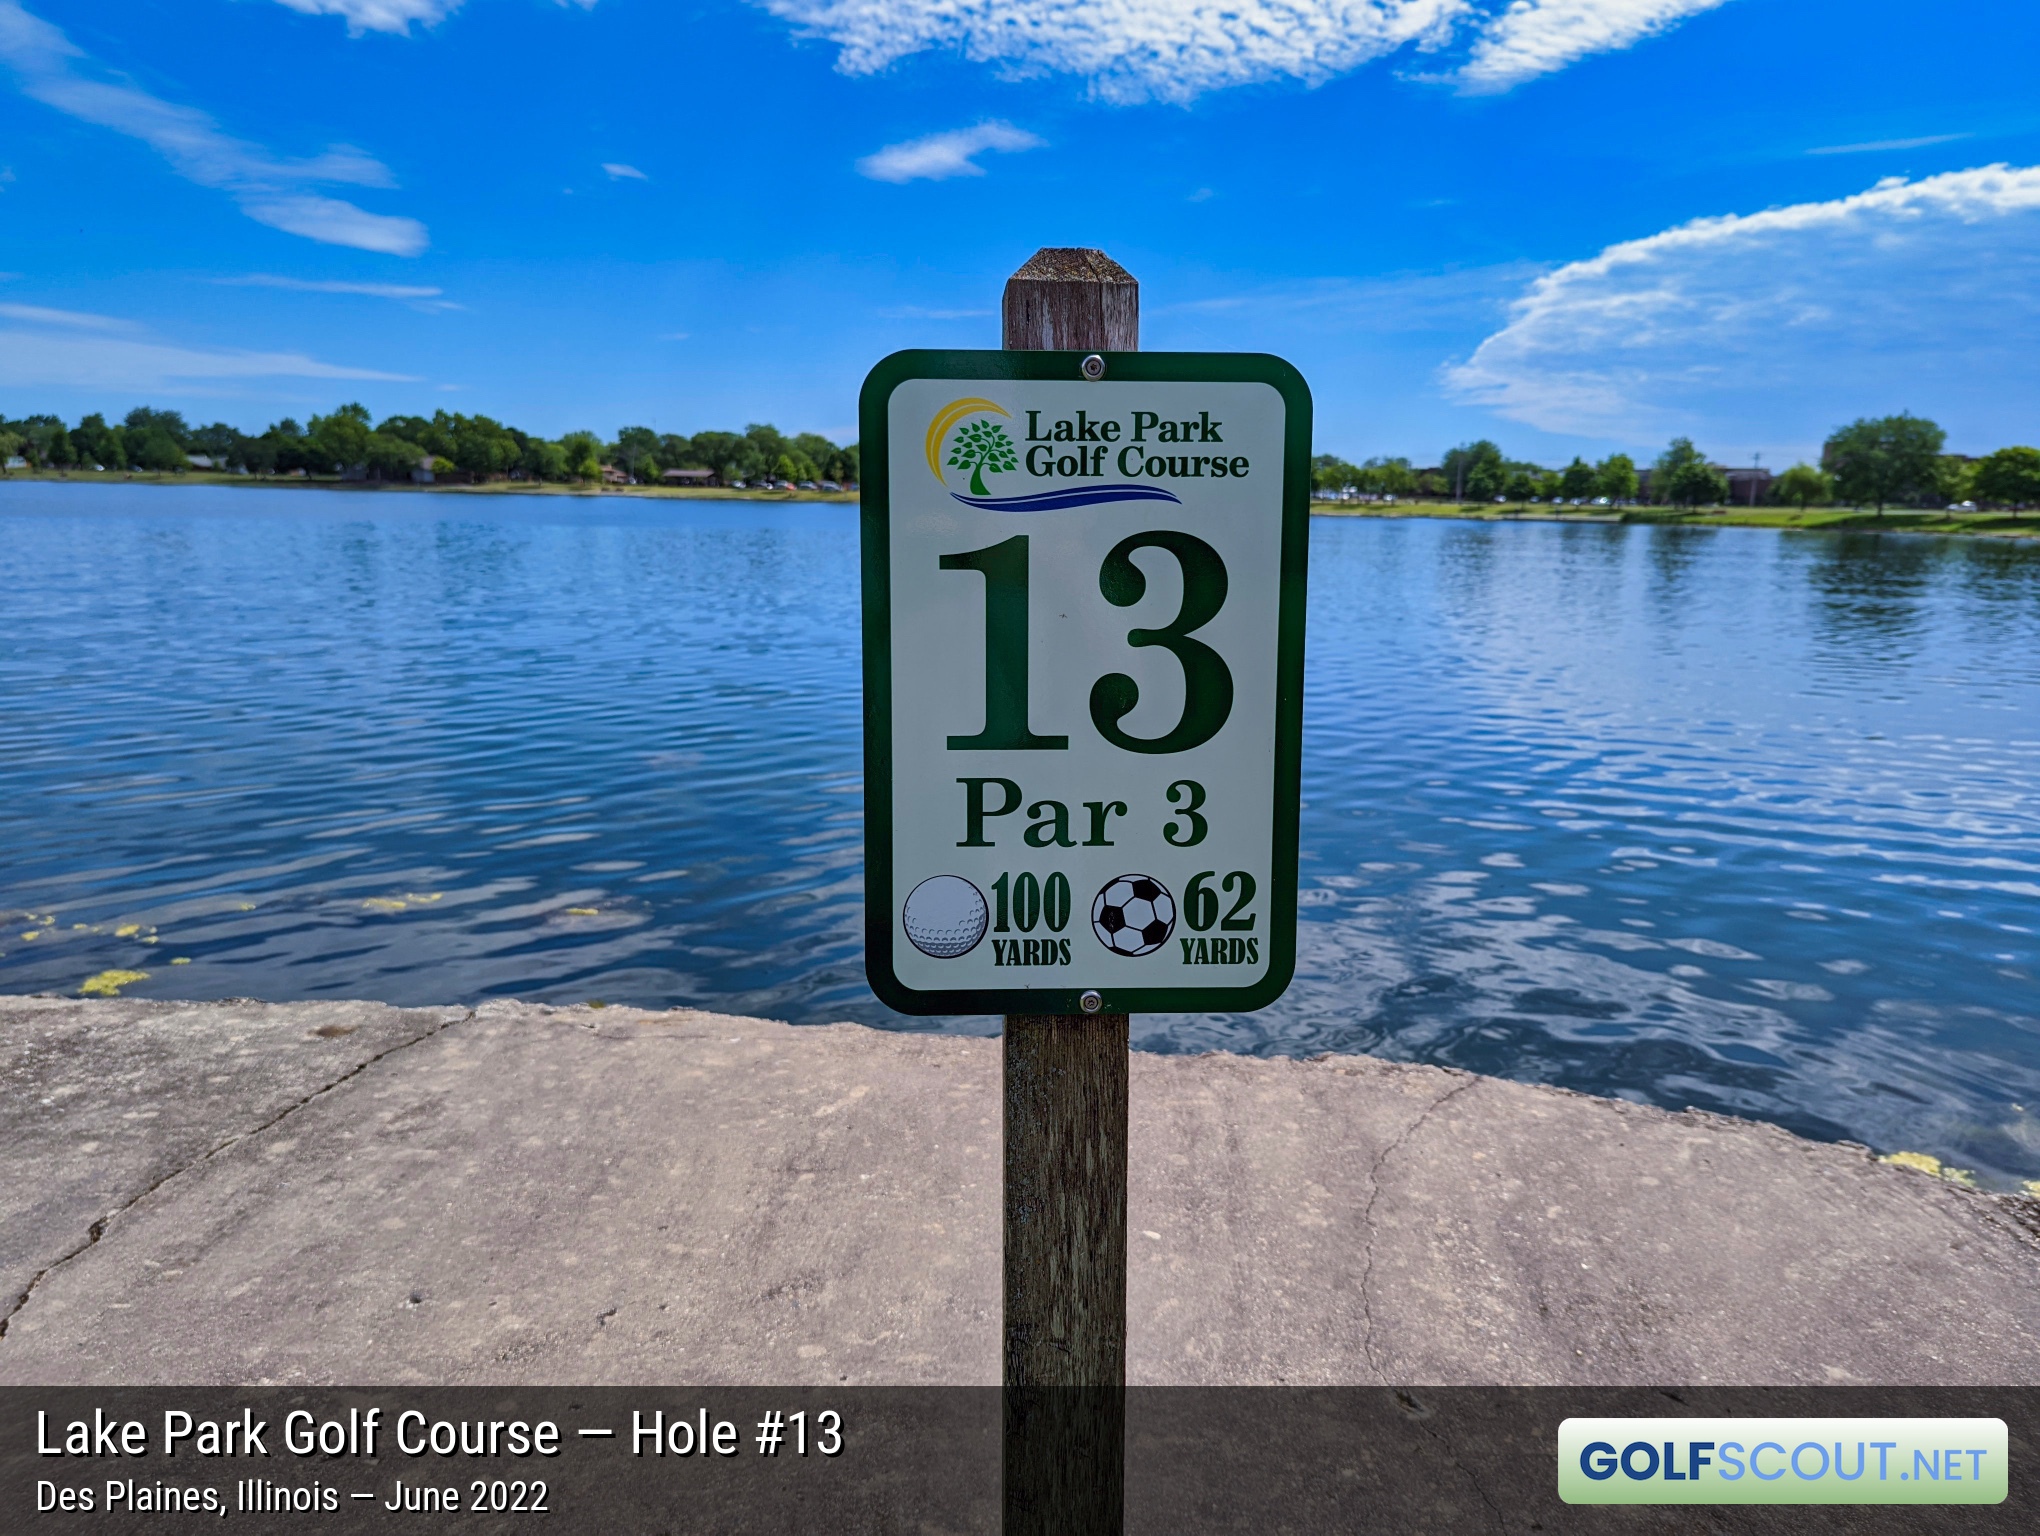 Photo of hole #13 at Lake Park Golf Course in Des Plaines, Illinois. 